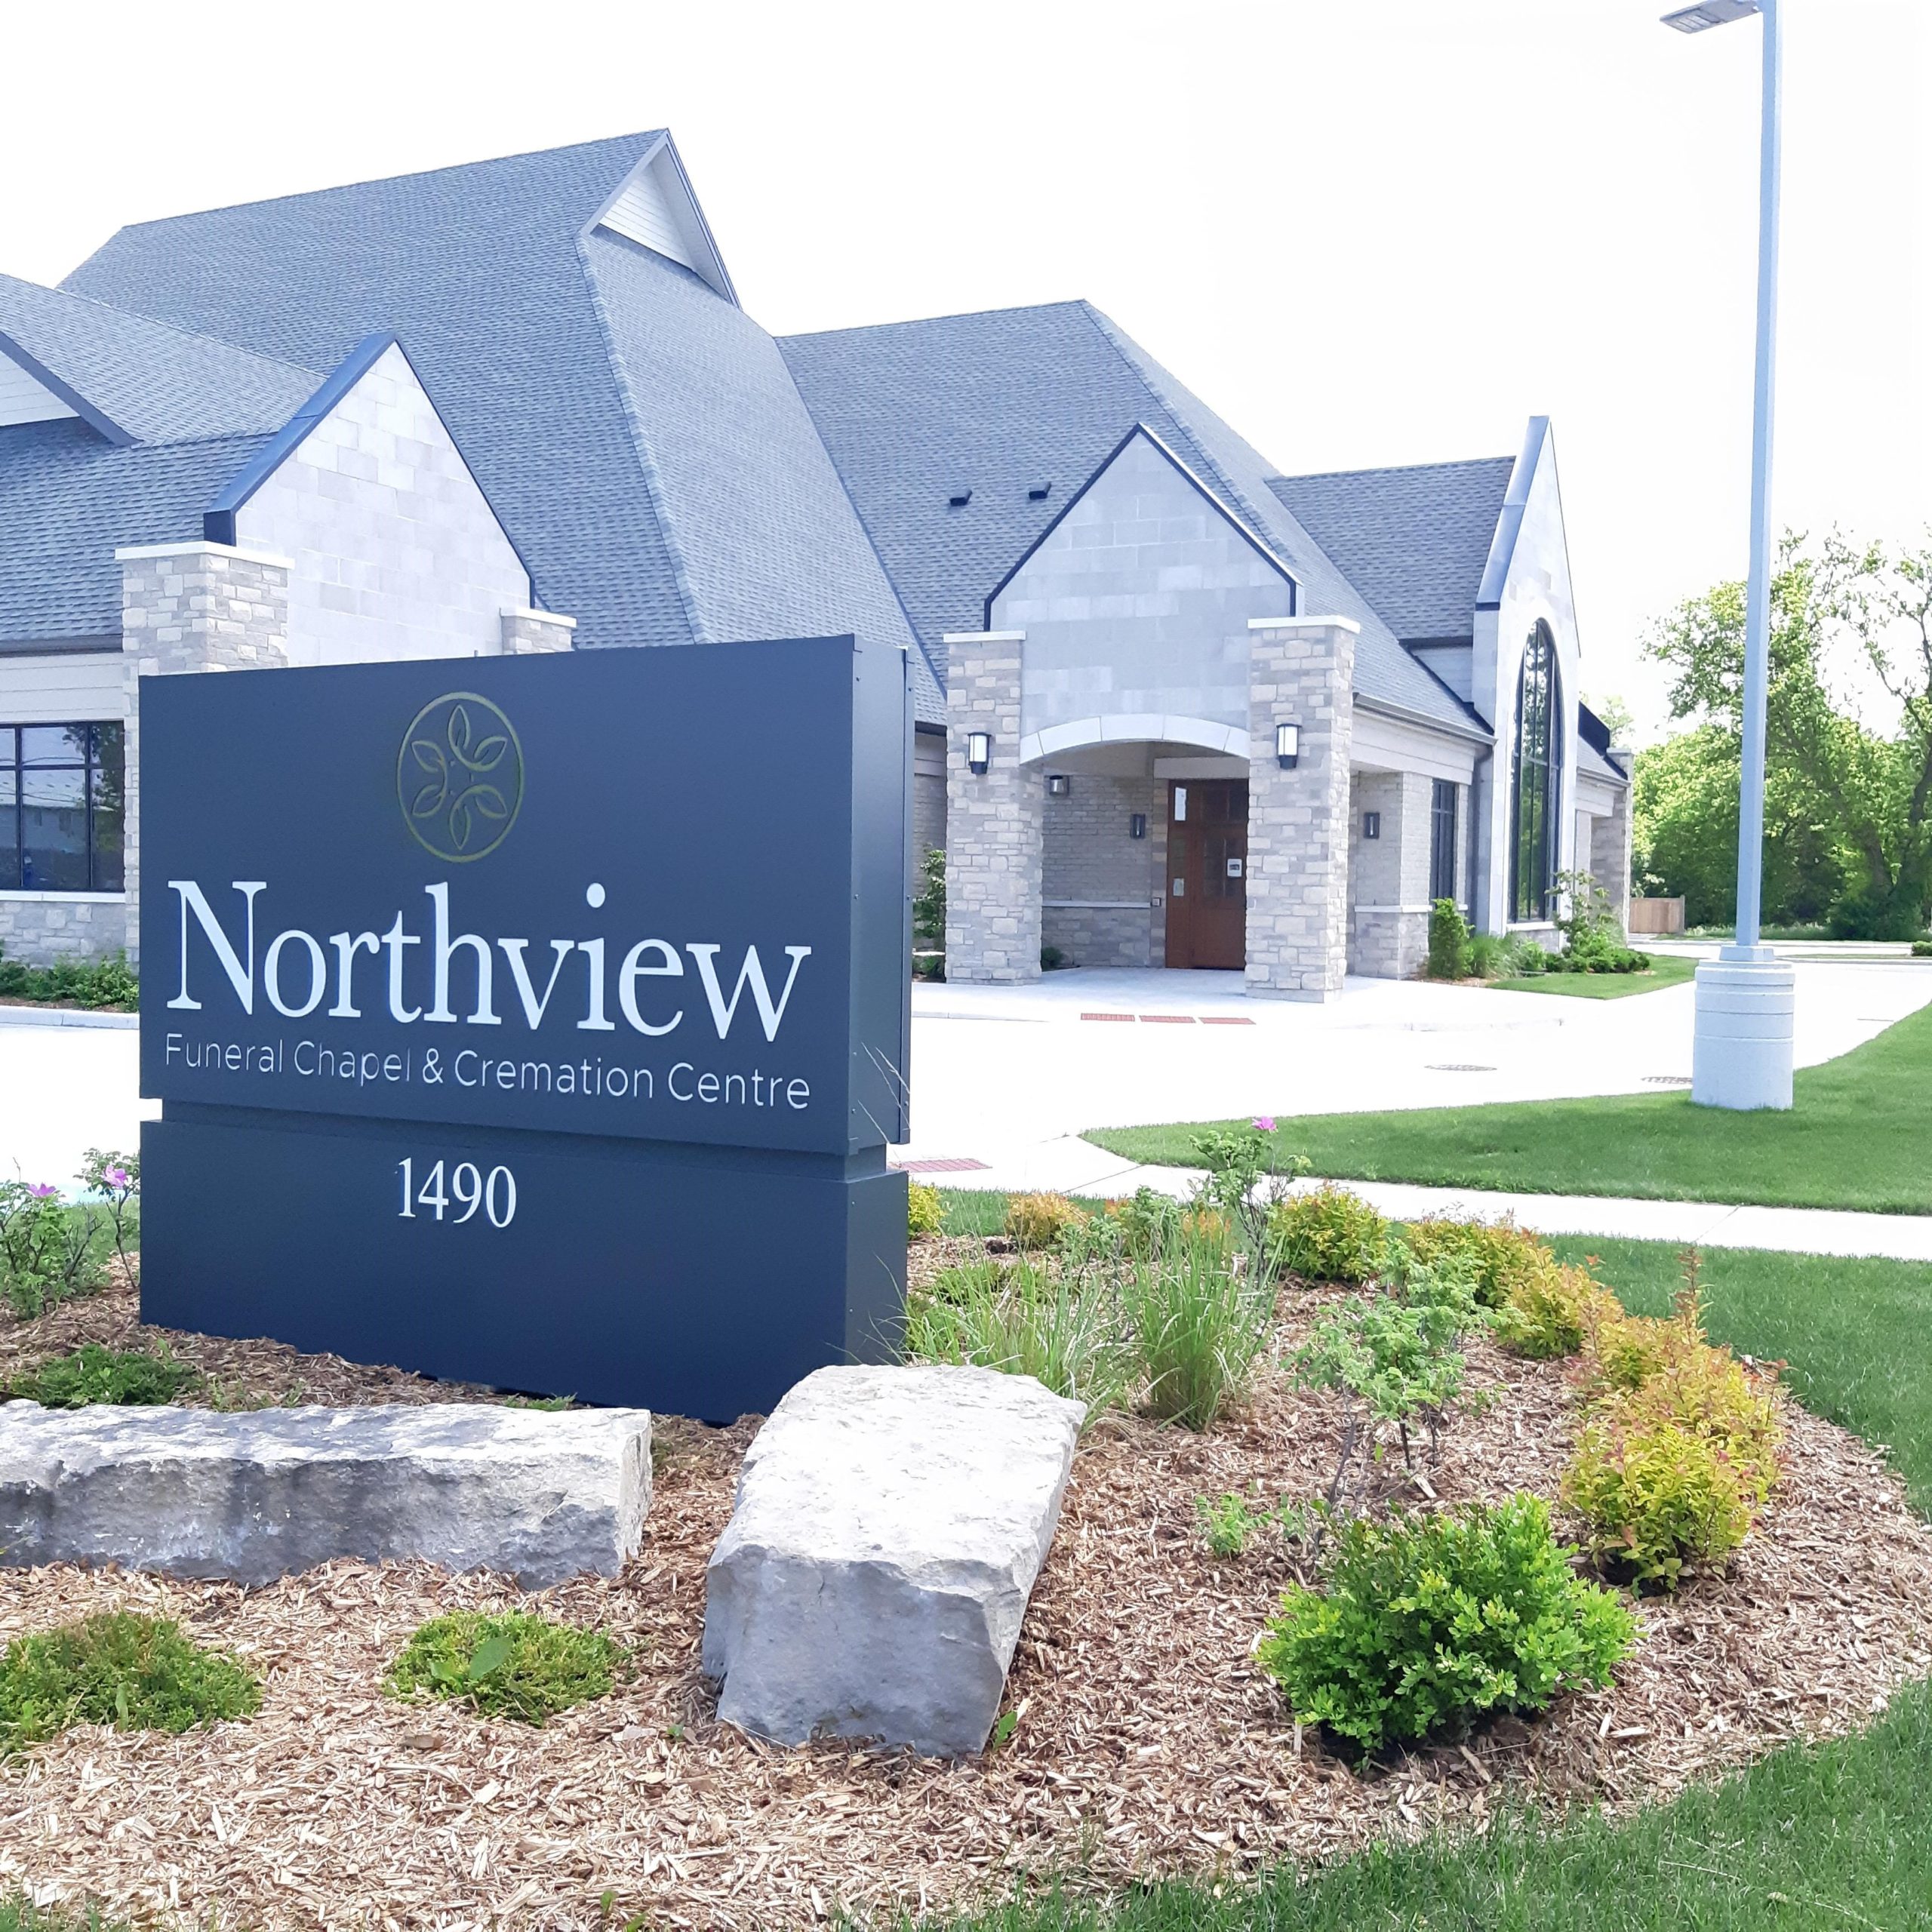 Funeral home with Northview sign at the entrance